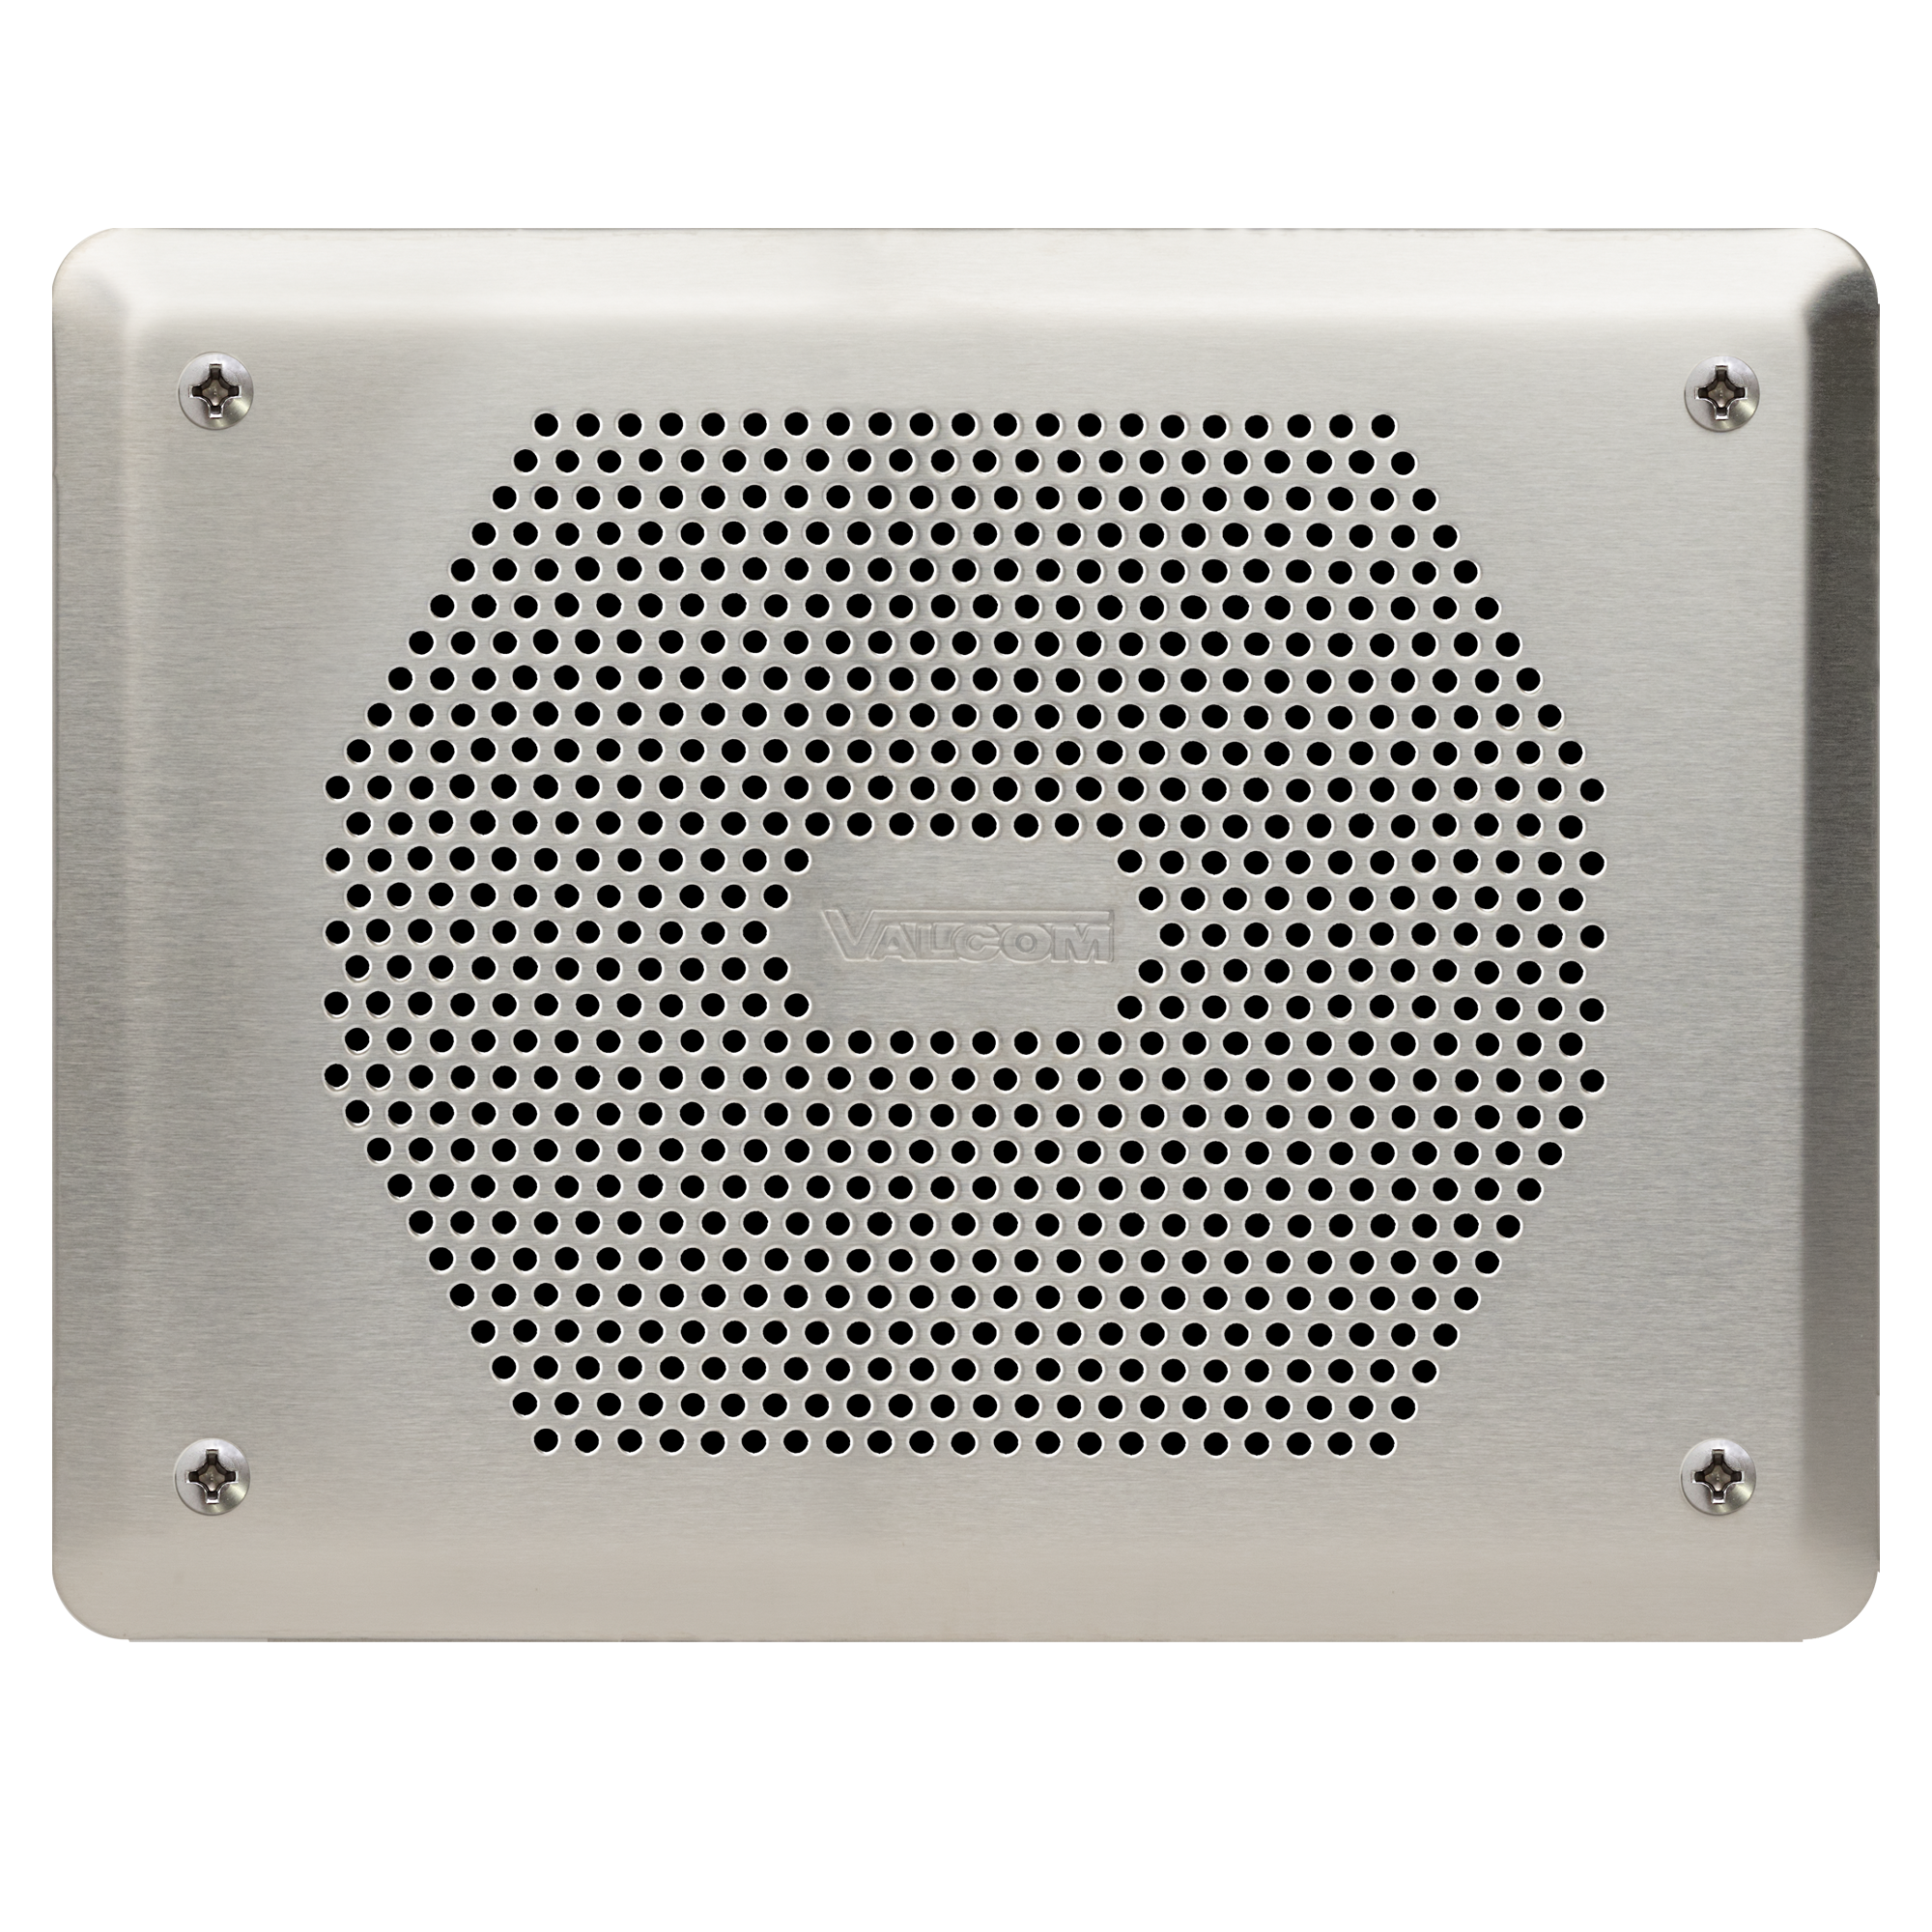 V-9806 Recessed Mount Vandal-Resistant Stainless Steel Faceplate (for FlexHorn™ Not Included)